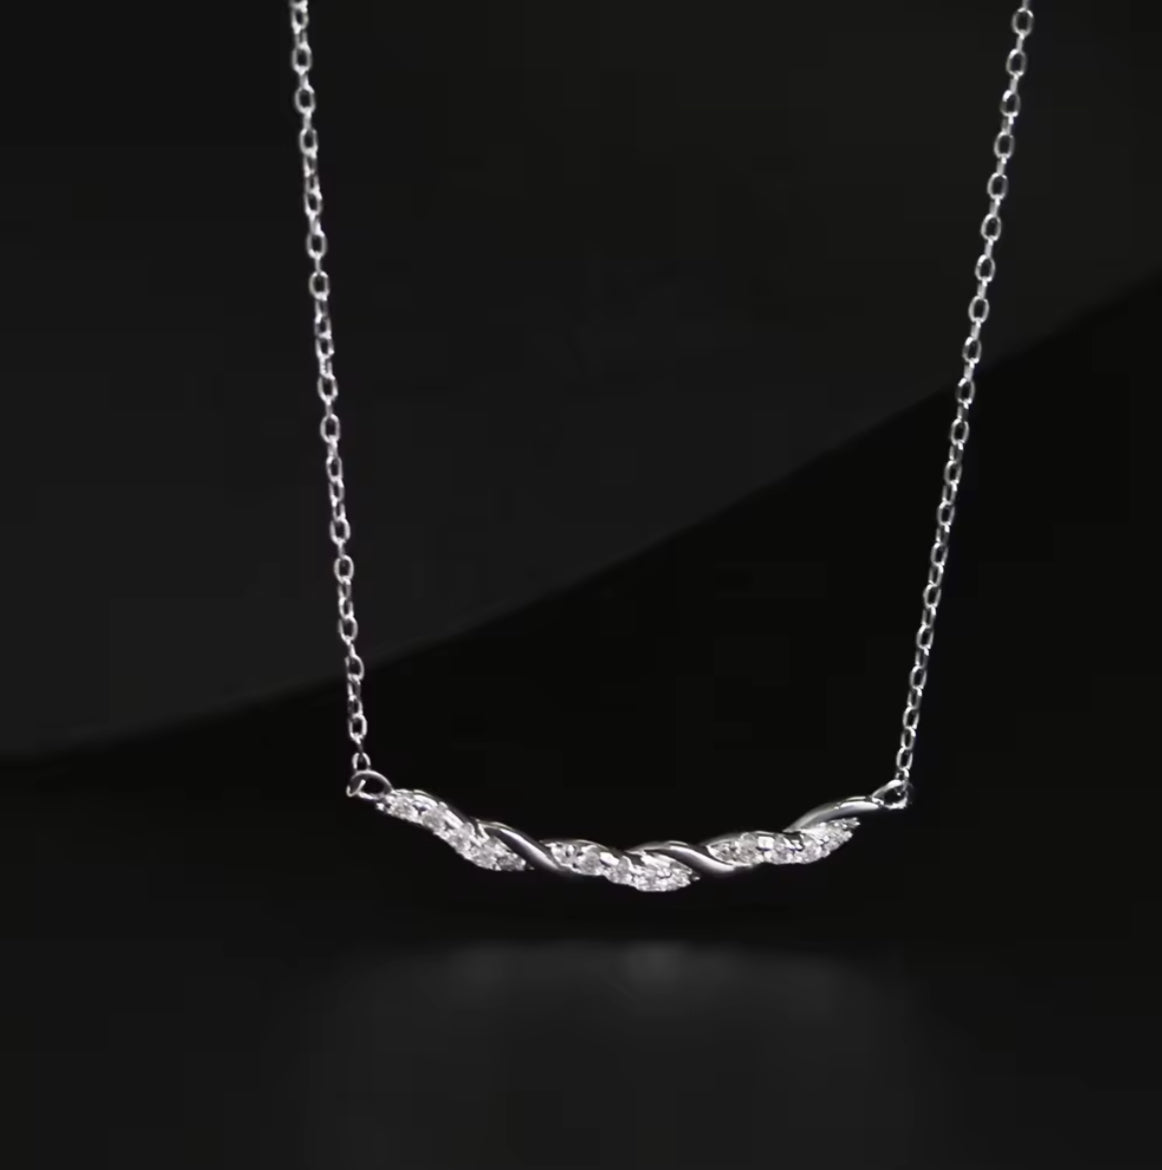 Simple and elegant necklace